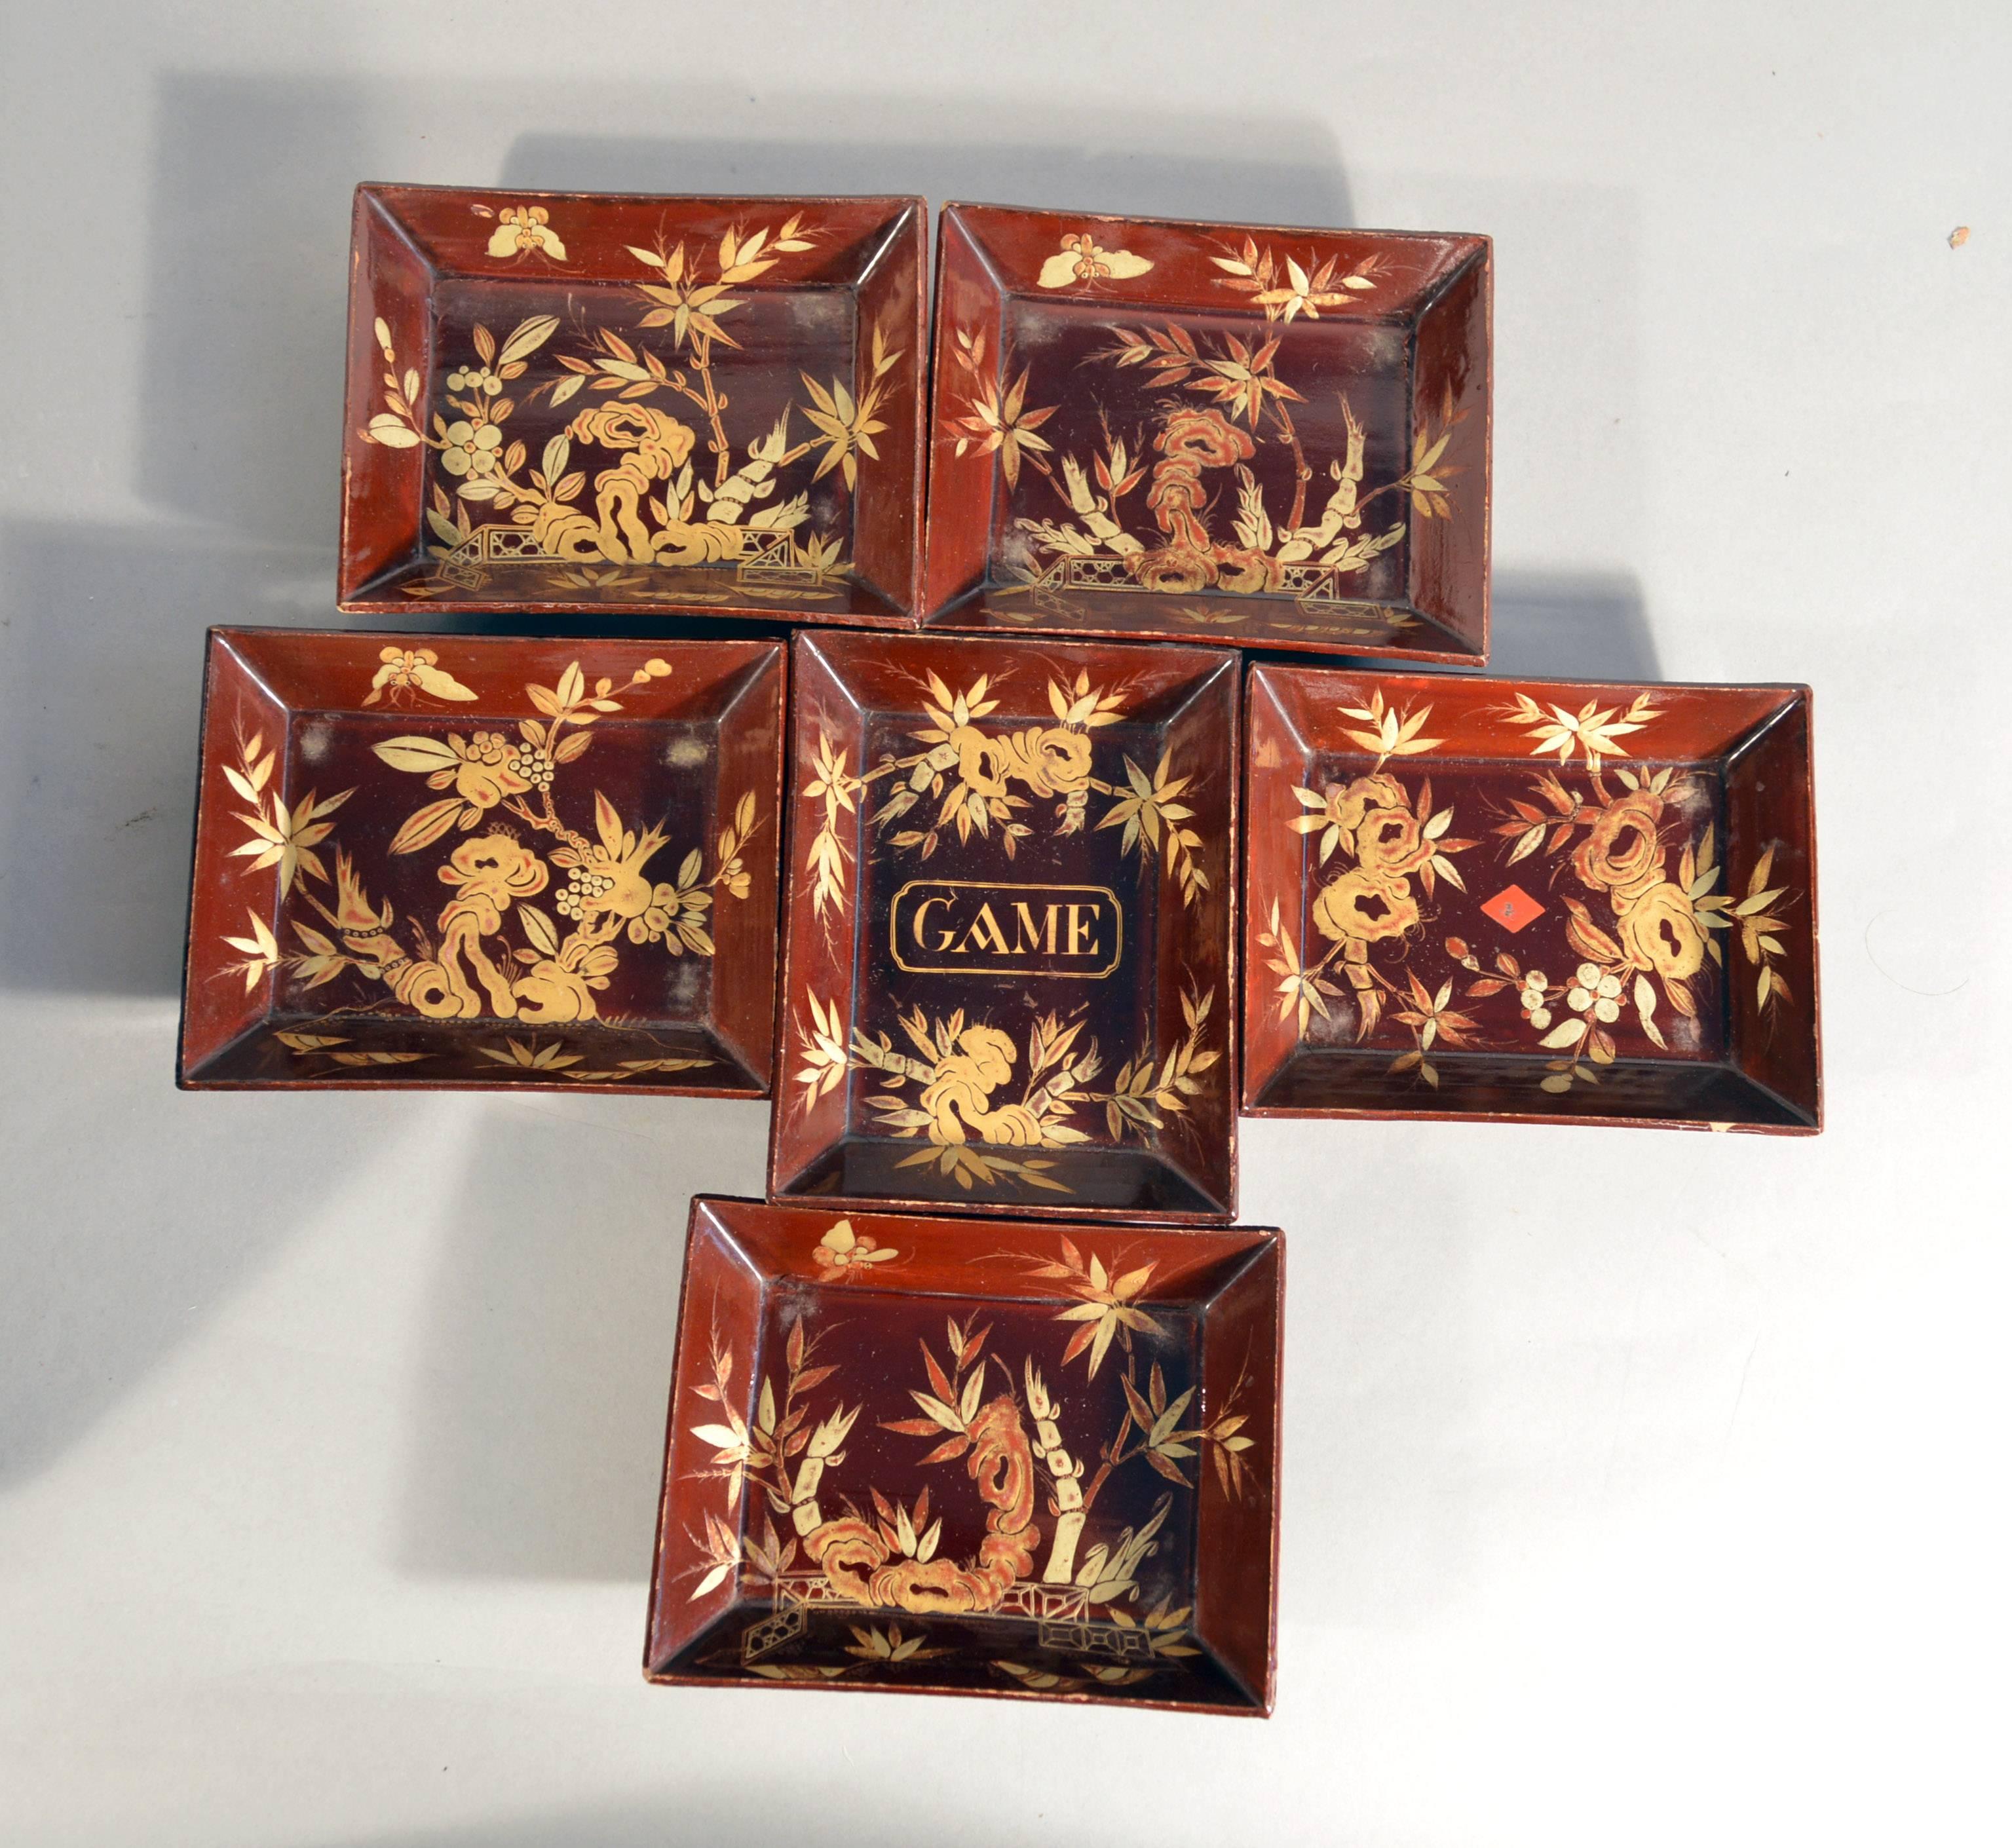 Chinese Export Chinese Red Lacquer Covered Games Box with Inner Trays & Boxes, circa 1825-1850